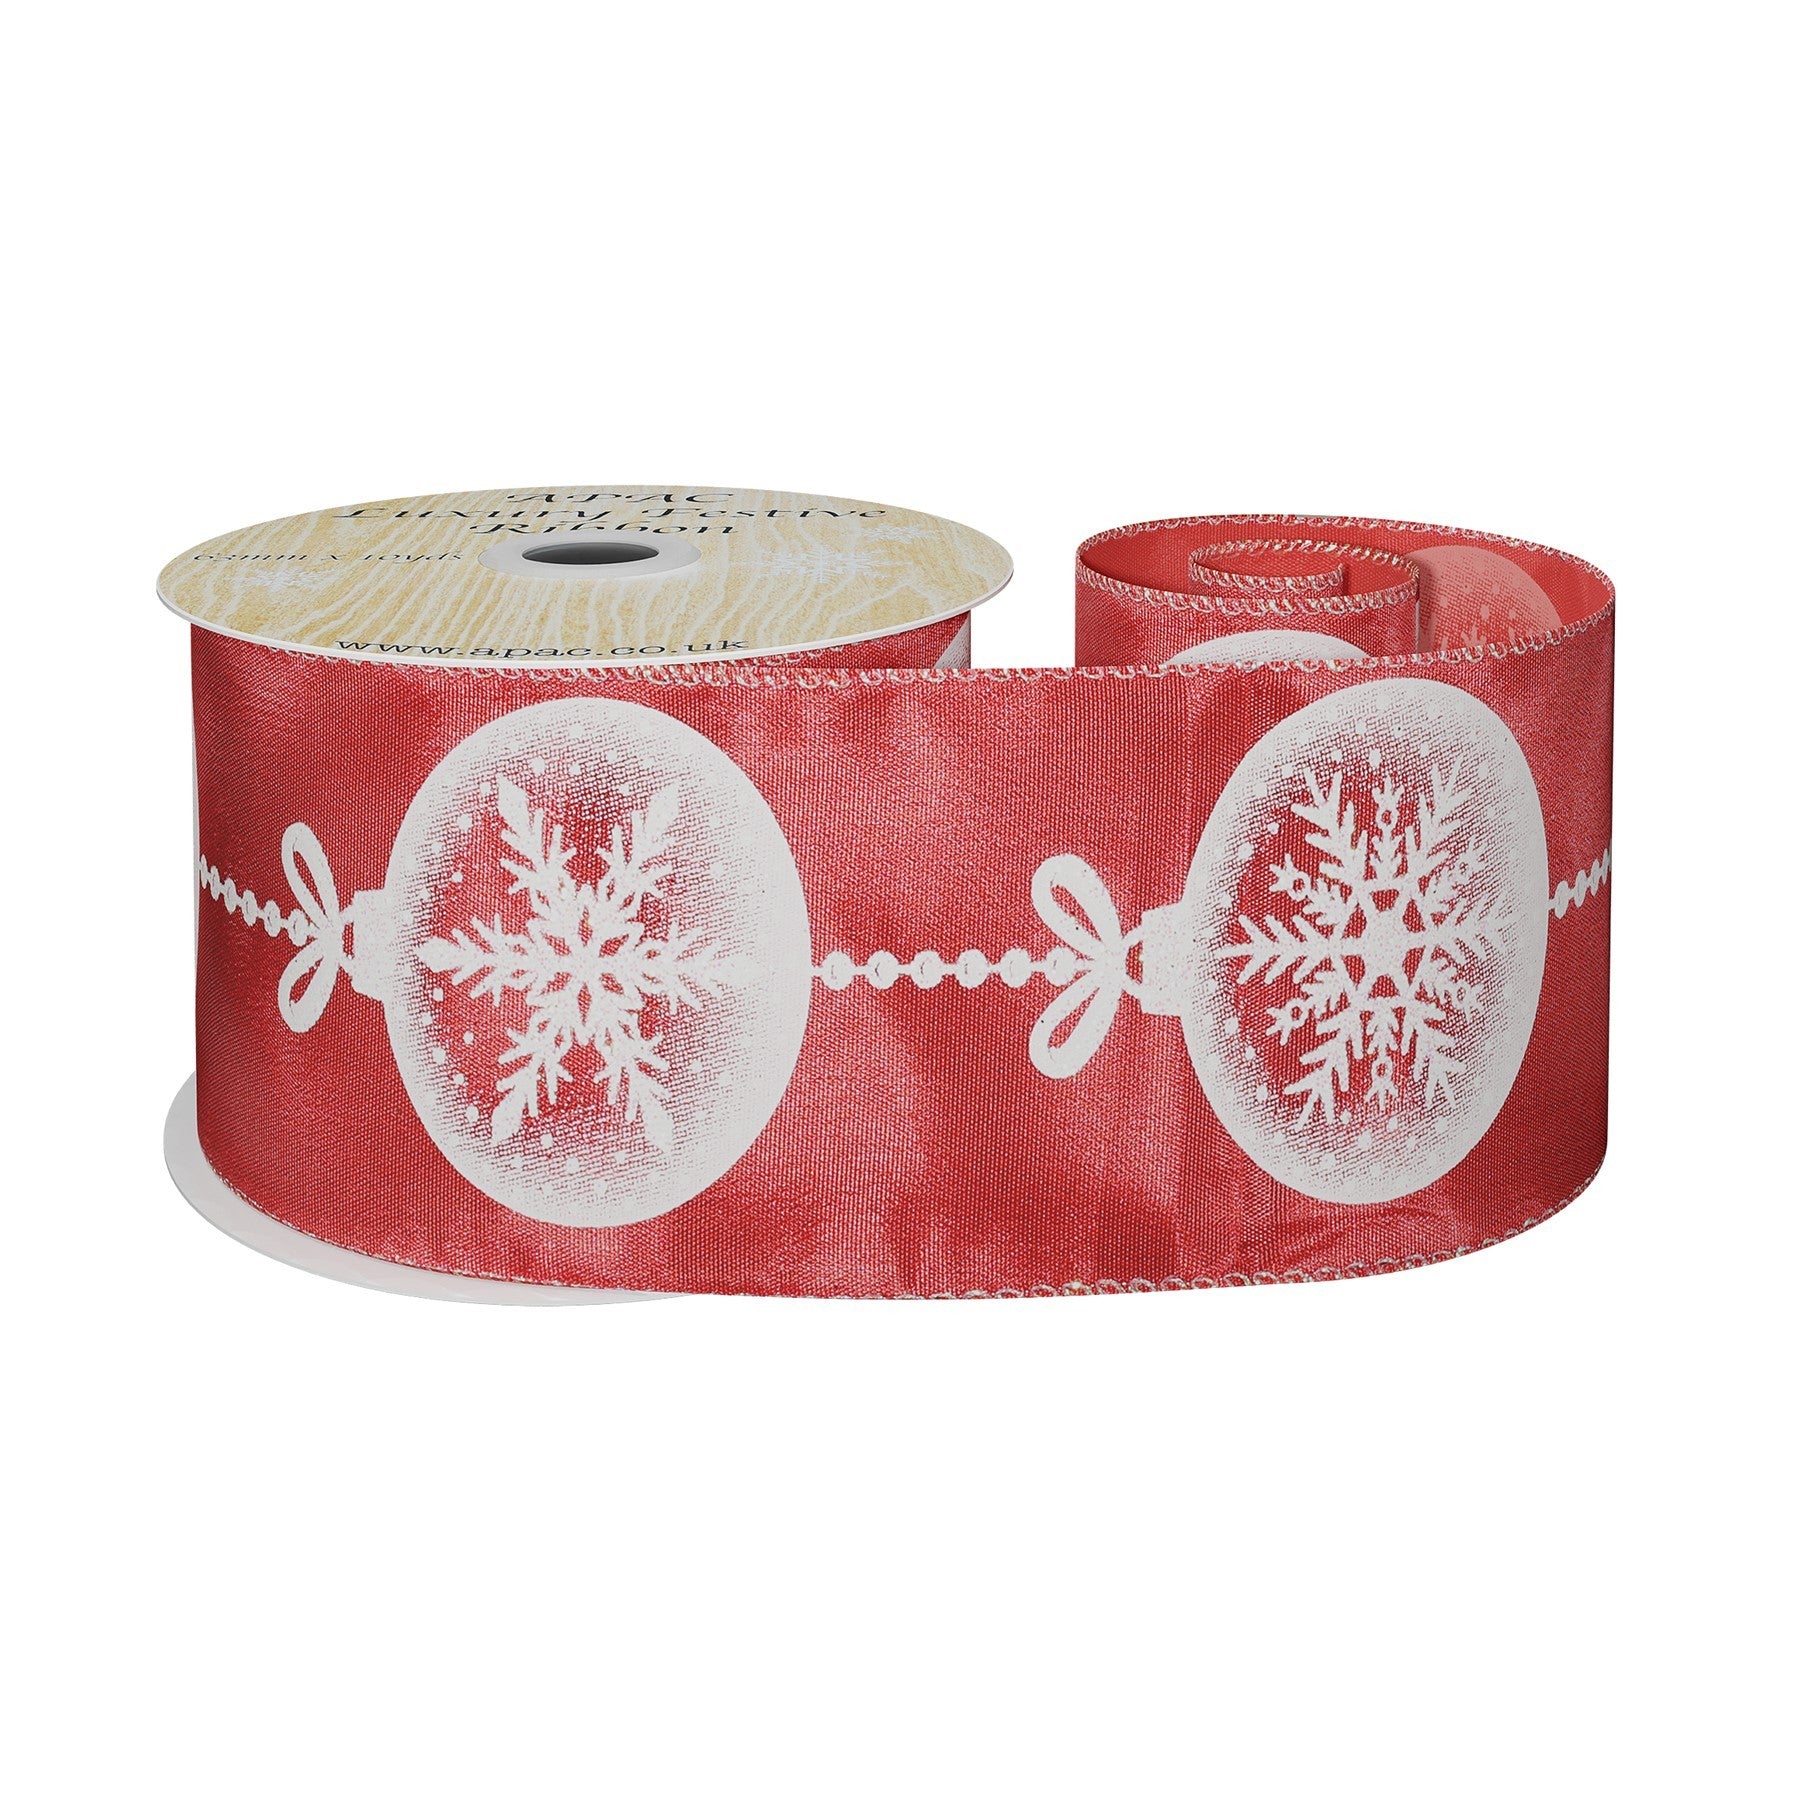 View Red Satin Ribbon with Snowflake Bauble Print 63mm x 9m information